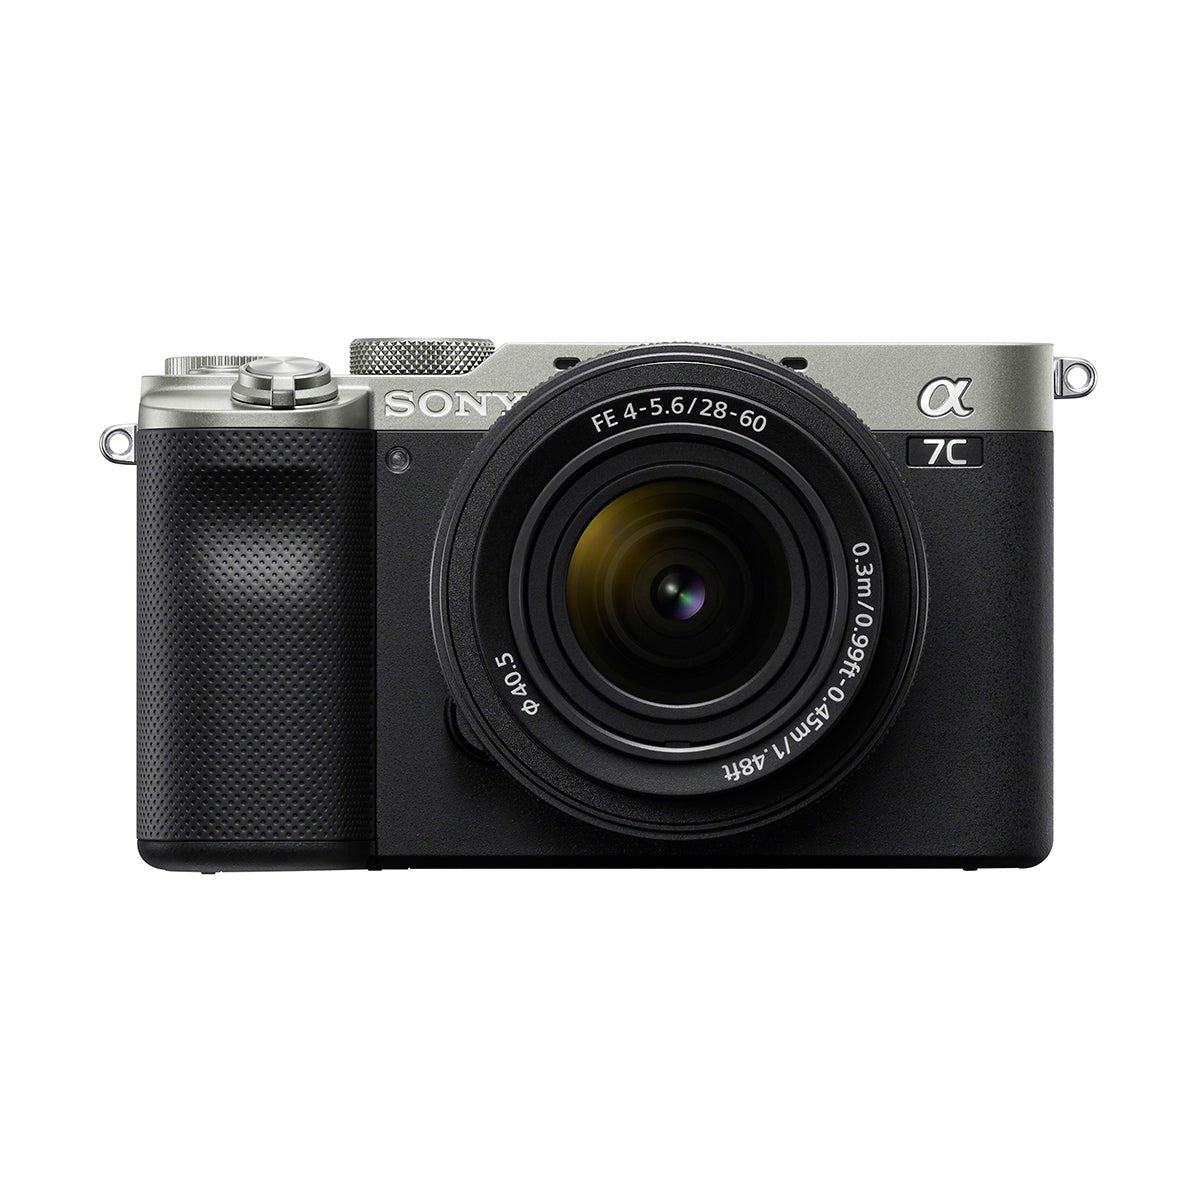 Sony Alpha a7C Full Frame Mirrorless Camera with FE 28-60mm f/4-5.6 Lens (Silver)